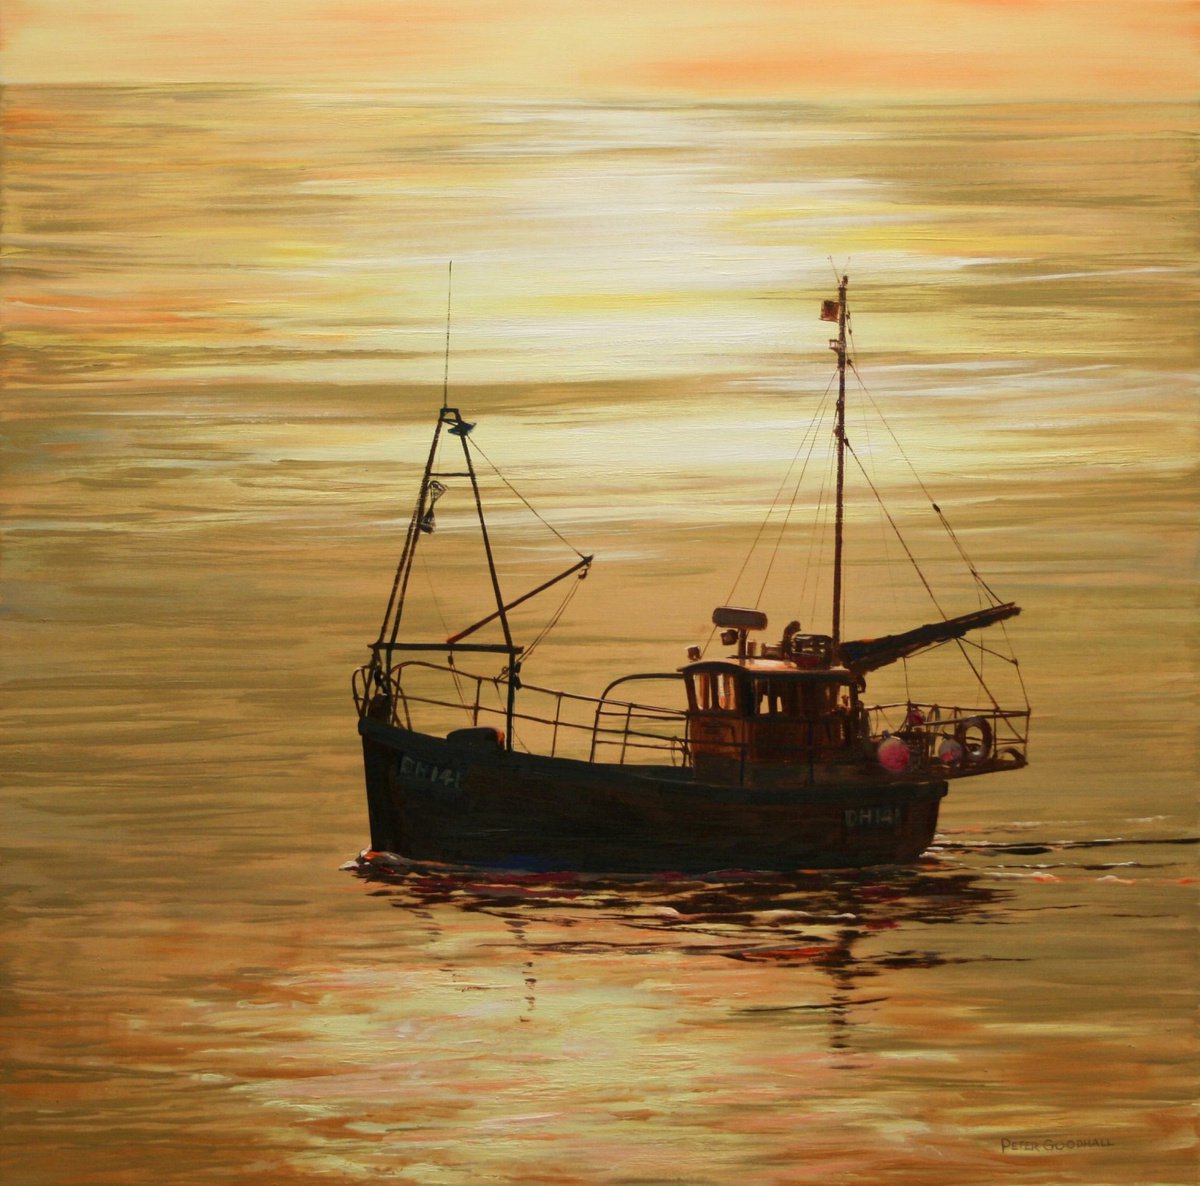 OFF POTTING ON A CALM MORNING by Peter Goodhall